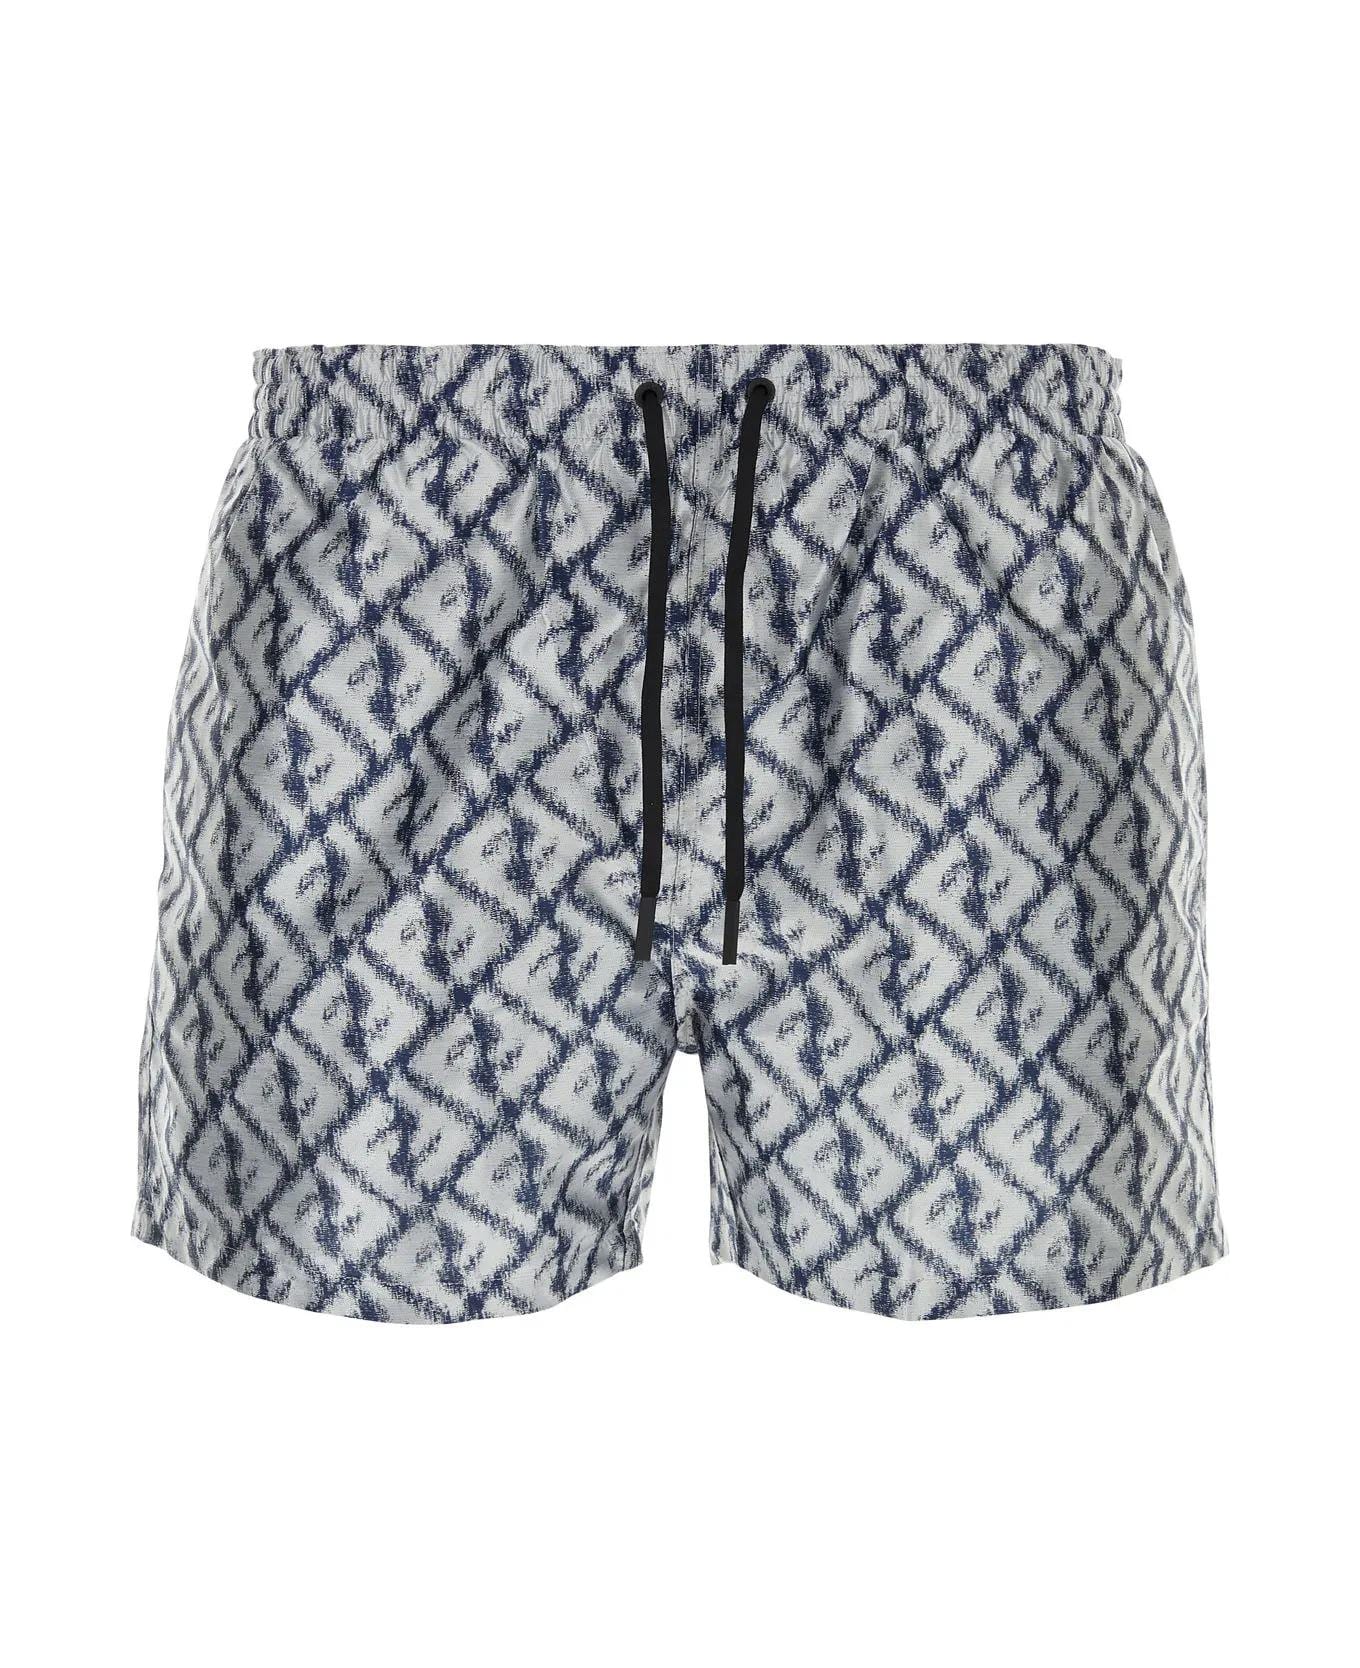 Fendi Embroidered Polyester Swimming Shorts - Krn Zucca Blue